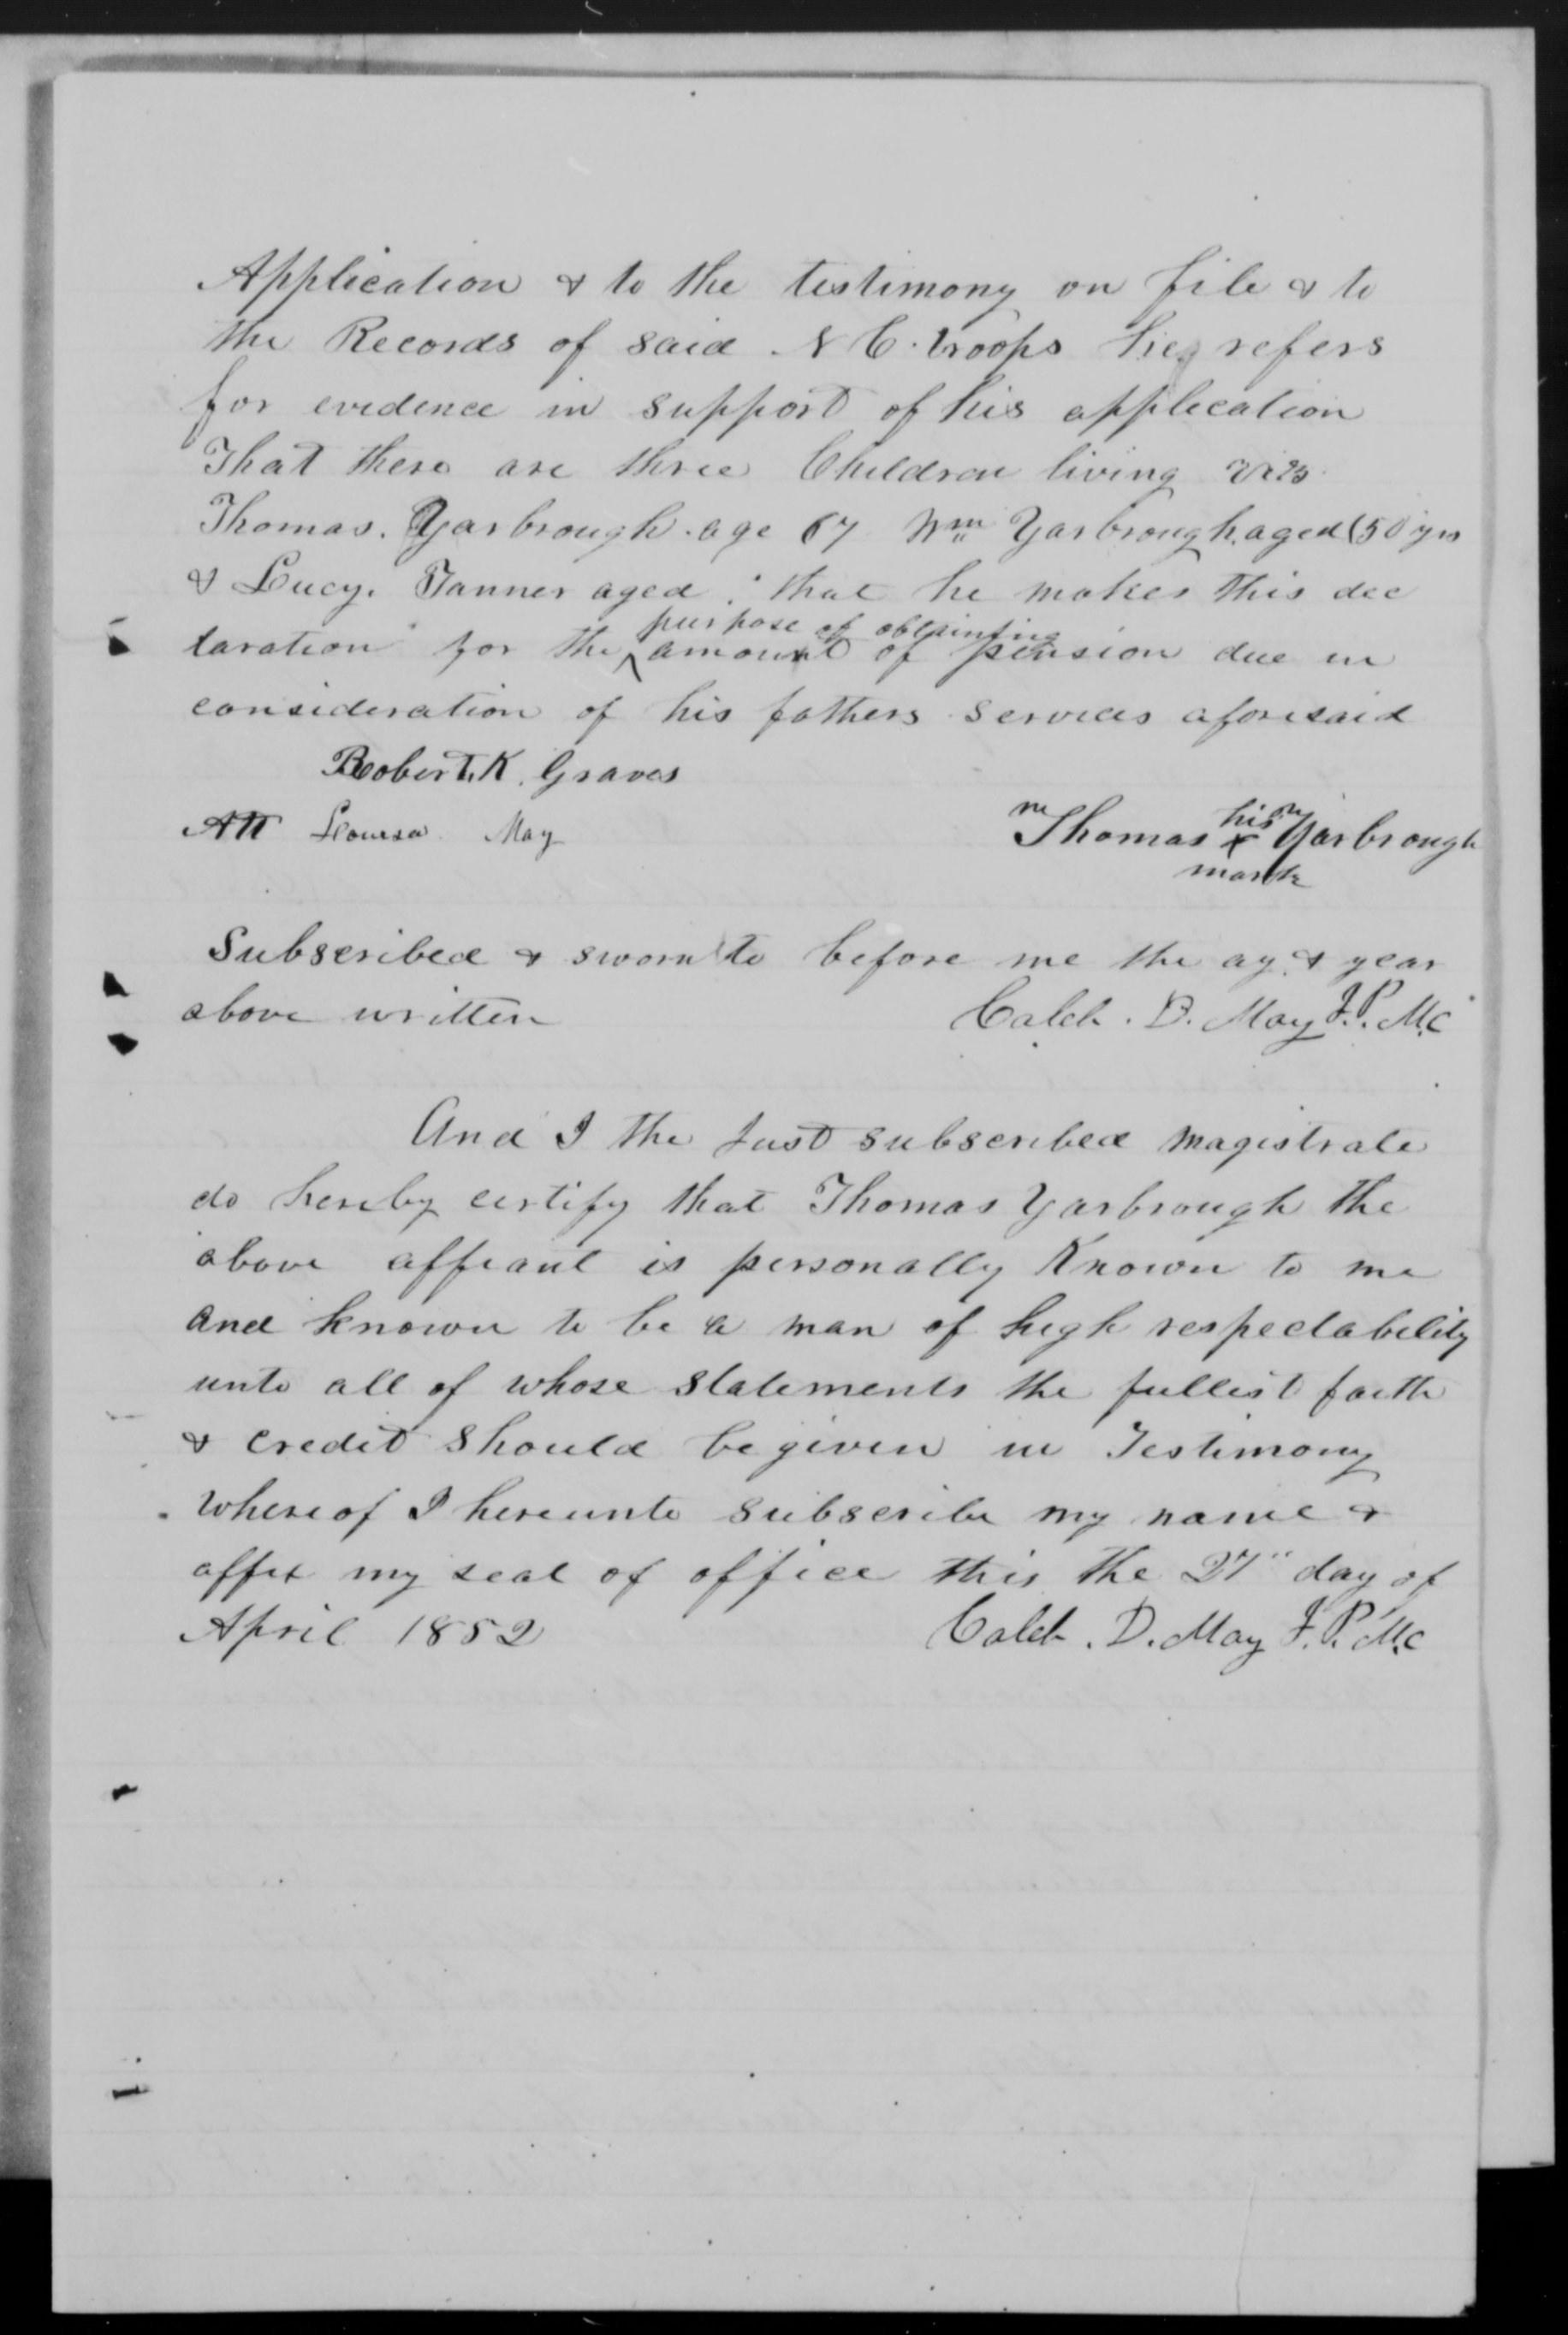 Affidavit of Thomas Yarborough in support of a Pension Claim for Mary Yarborough, 27 April 1852, page 3